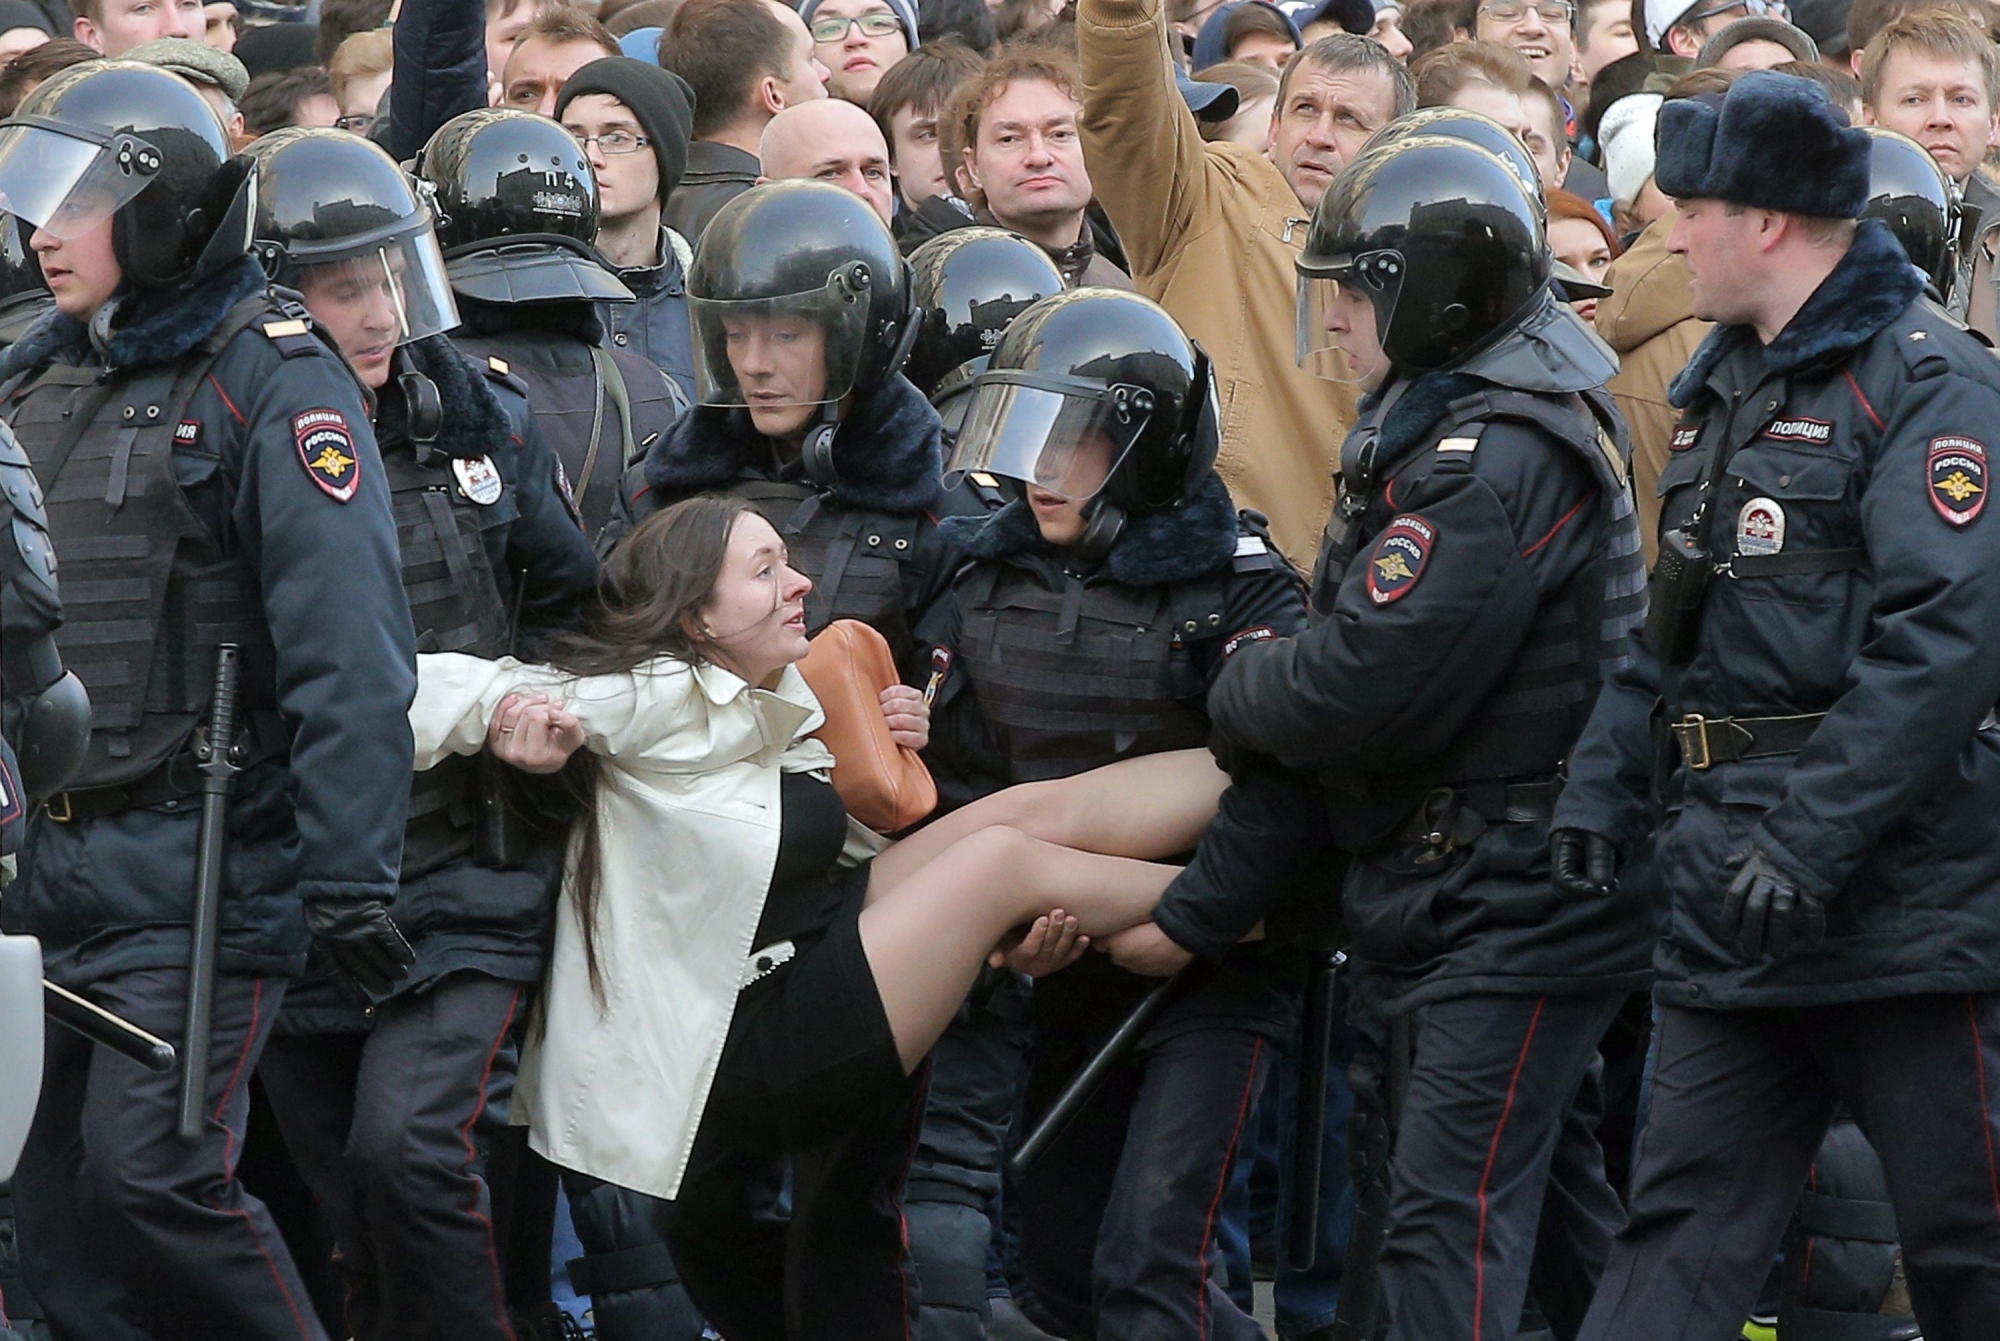 epaselect epa05871912 Russian riot policemen detain a demonstrator during an opposition rally in central Moscow, Russia, 26 March 2017. Russian opposition leader Alexei Navalny called on his supporters to join a demonstration in central Moscow despite a ban from Moscow authorities. Throughout Russia the opposition held the so-called anti-corruption rallies. According to reports, dozens of demonstrators have been detained across the country as they called for the resignation of Russian Prime Minister Dmitry Medvedev over corruption allegations.  EPA/MAXIM SHIPENKOV epaselect RUSSIA OPPOSITION RALLY